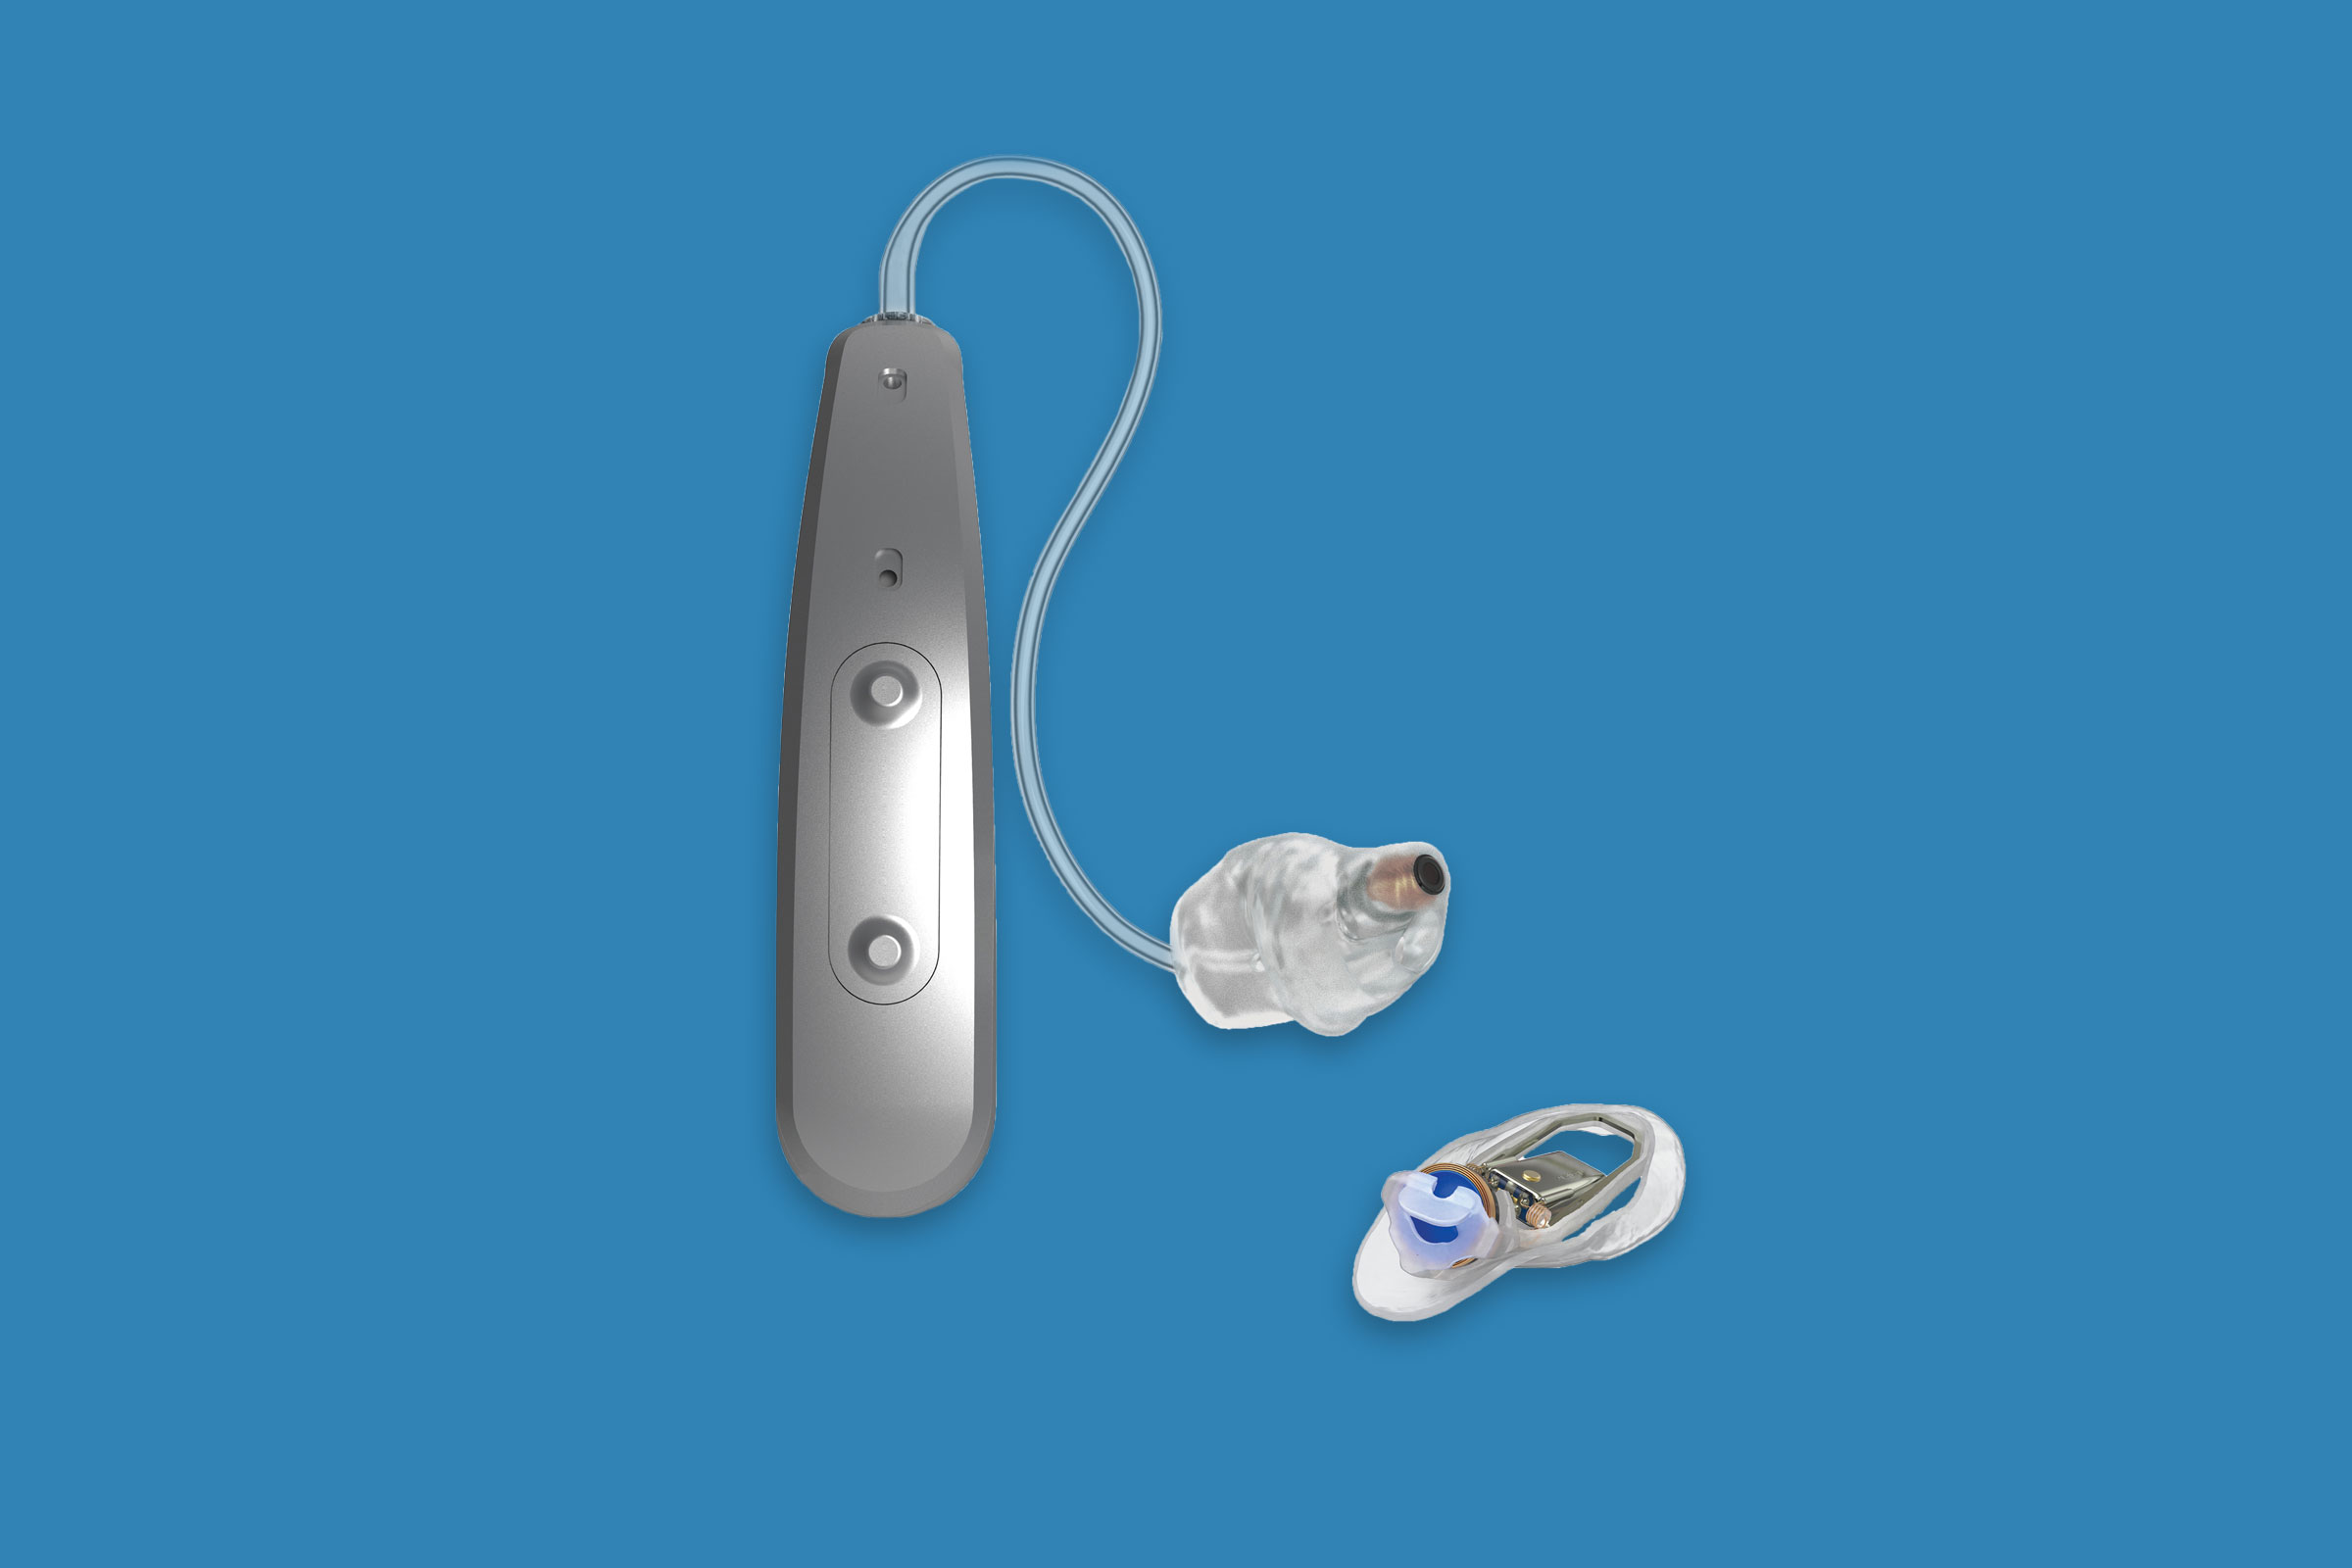 Best Inventions 2020: Earlens Contact Hearing Solution